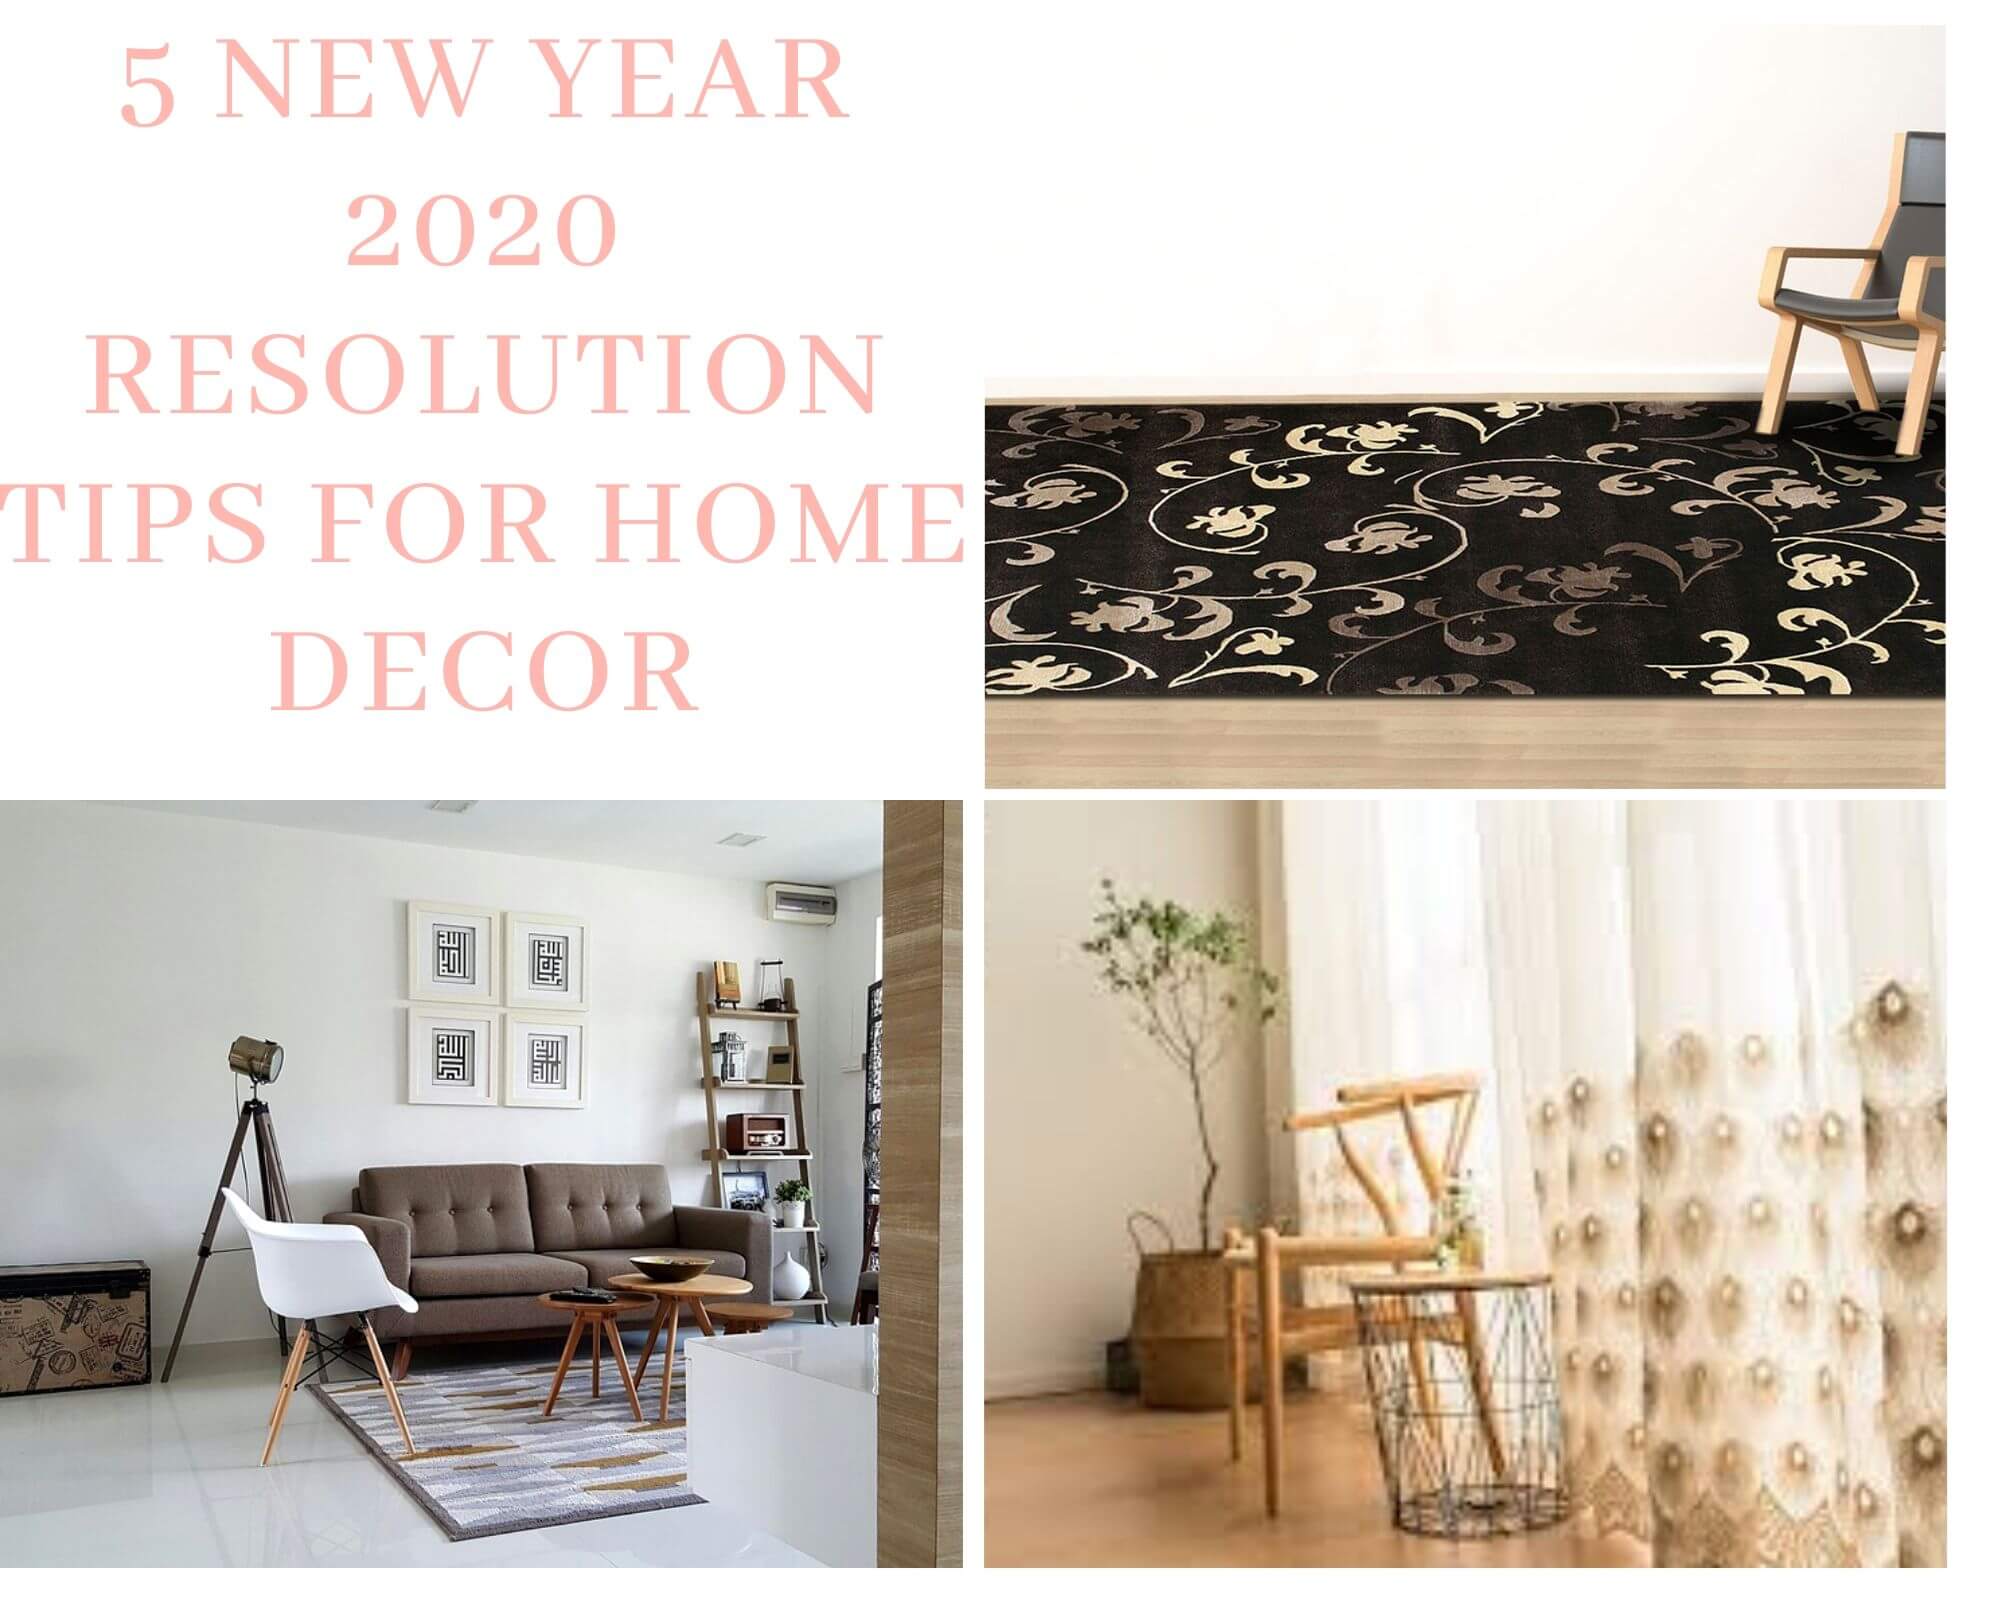 5 New Year 2020 Resolution Tips for Home Decor